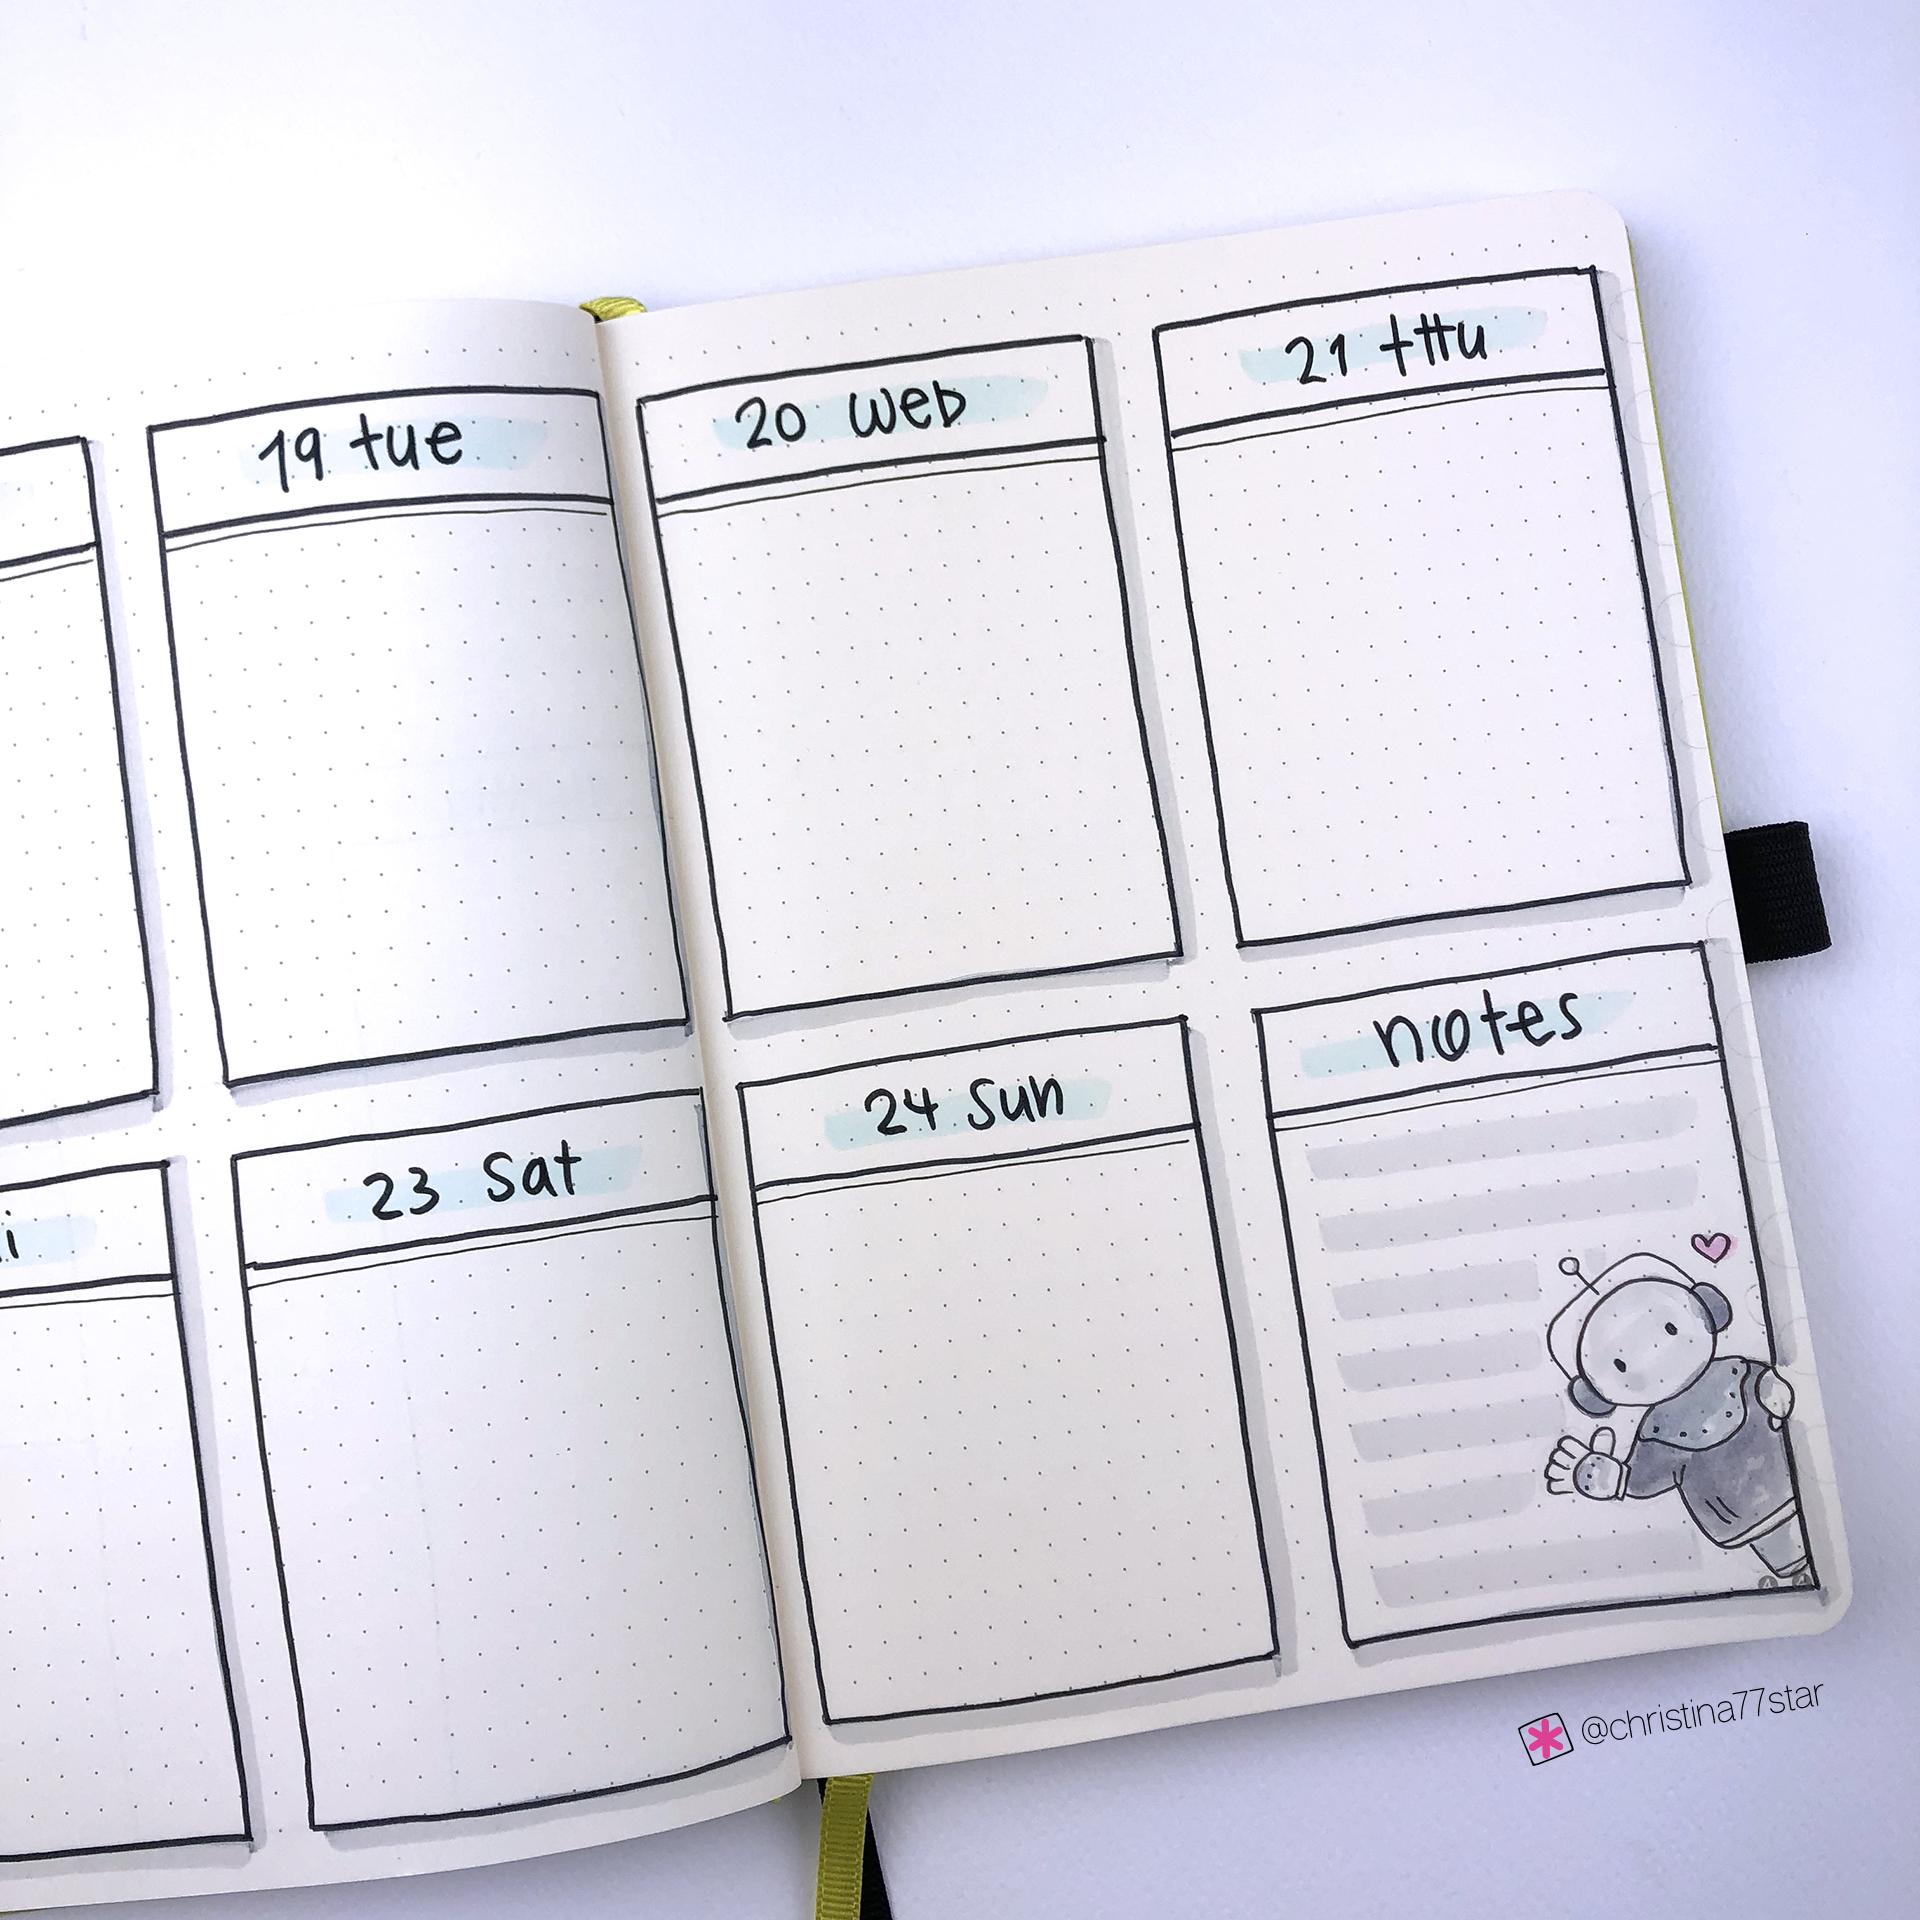 Bullet Journal Ideas: 4 Weekly Spread Layouts for February 2019 ...